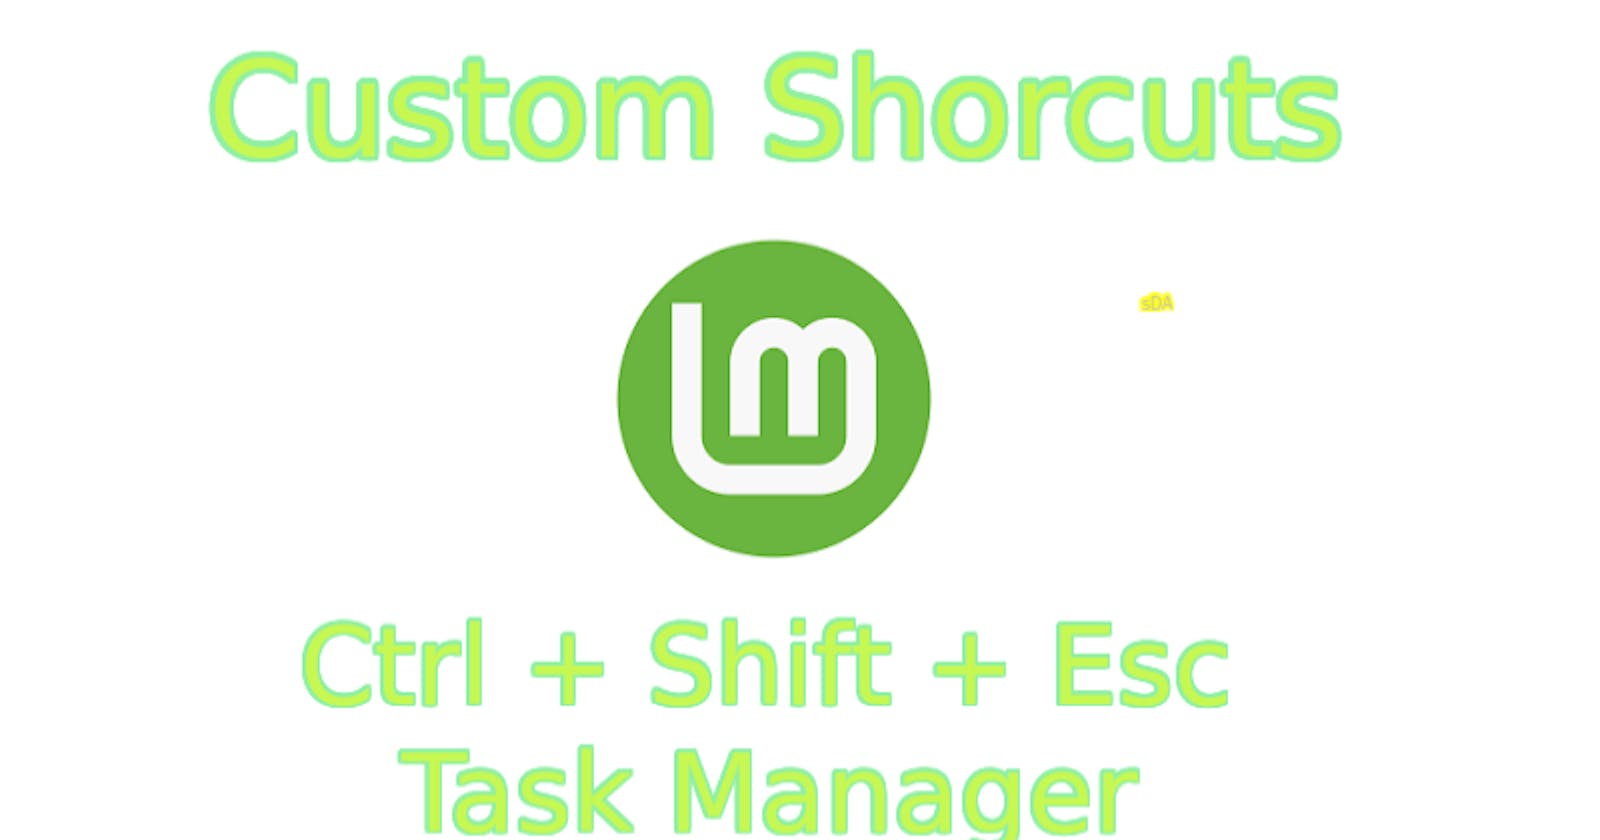 Use Windows shortcuts in Linux Mint